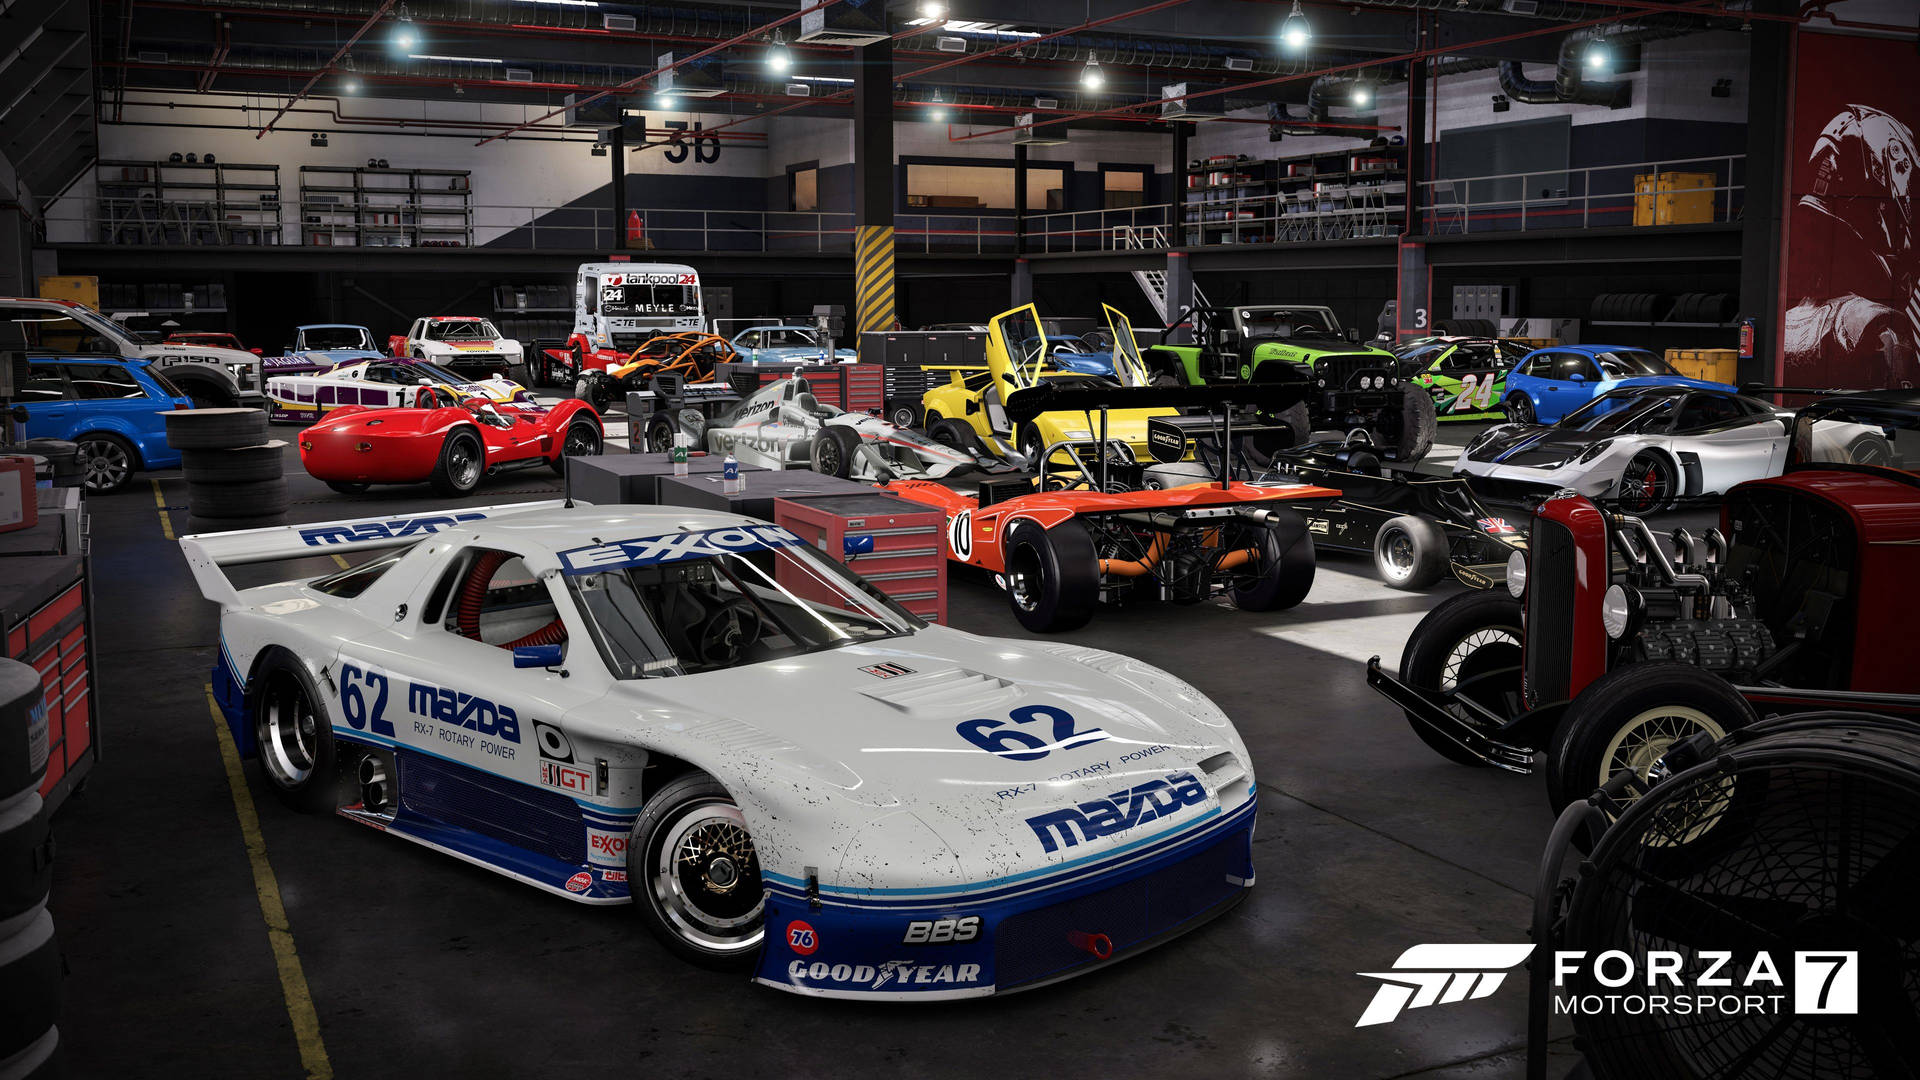 Forza Motorsport 7 Muscle Cars Garage Background